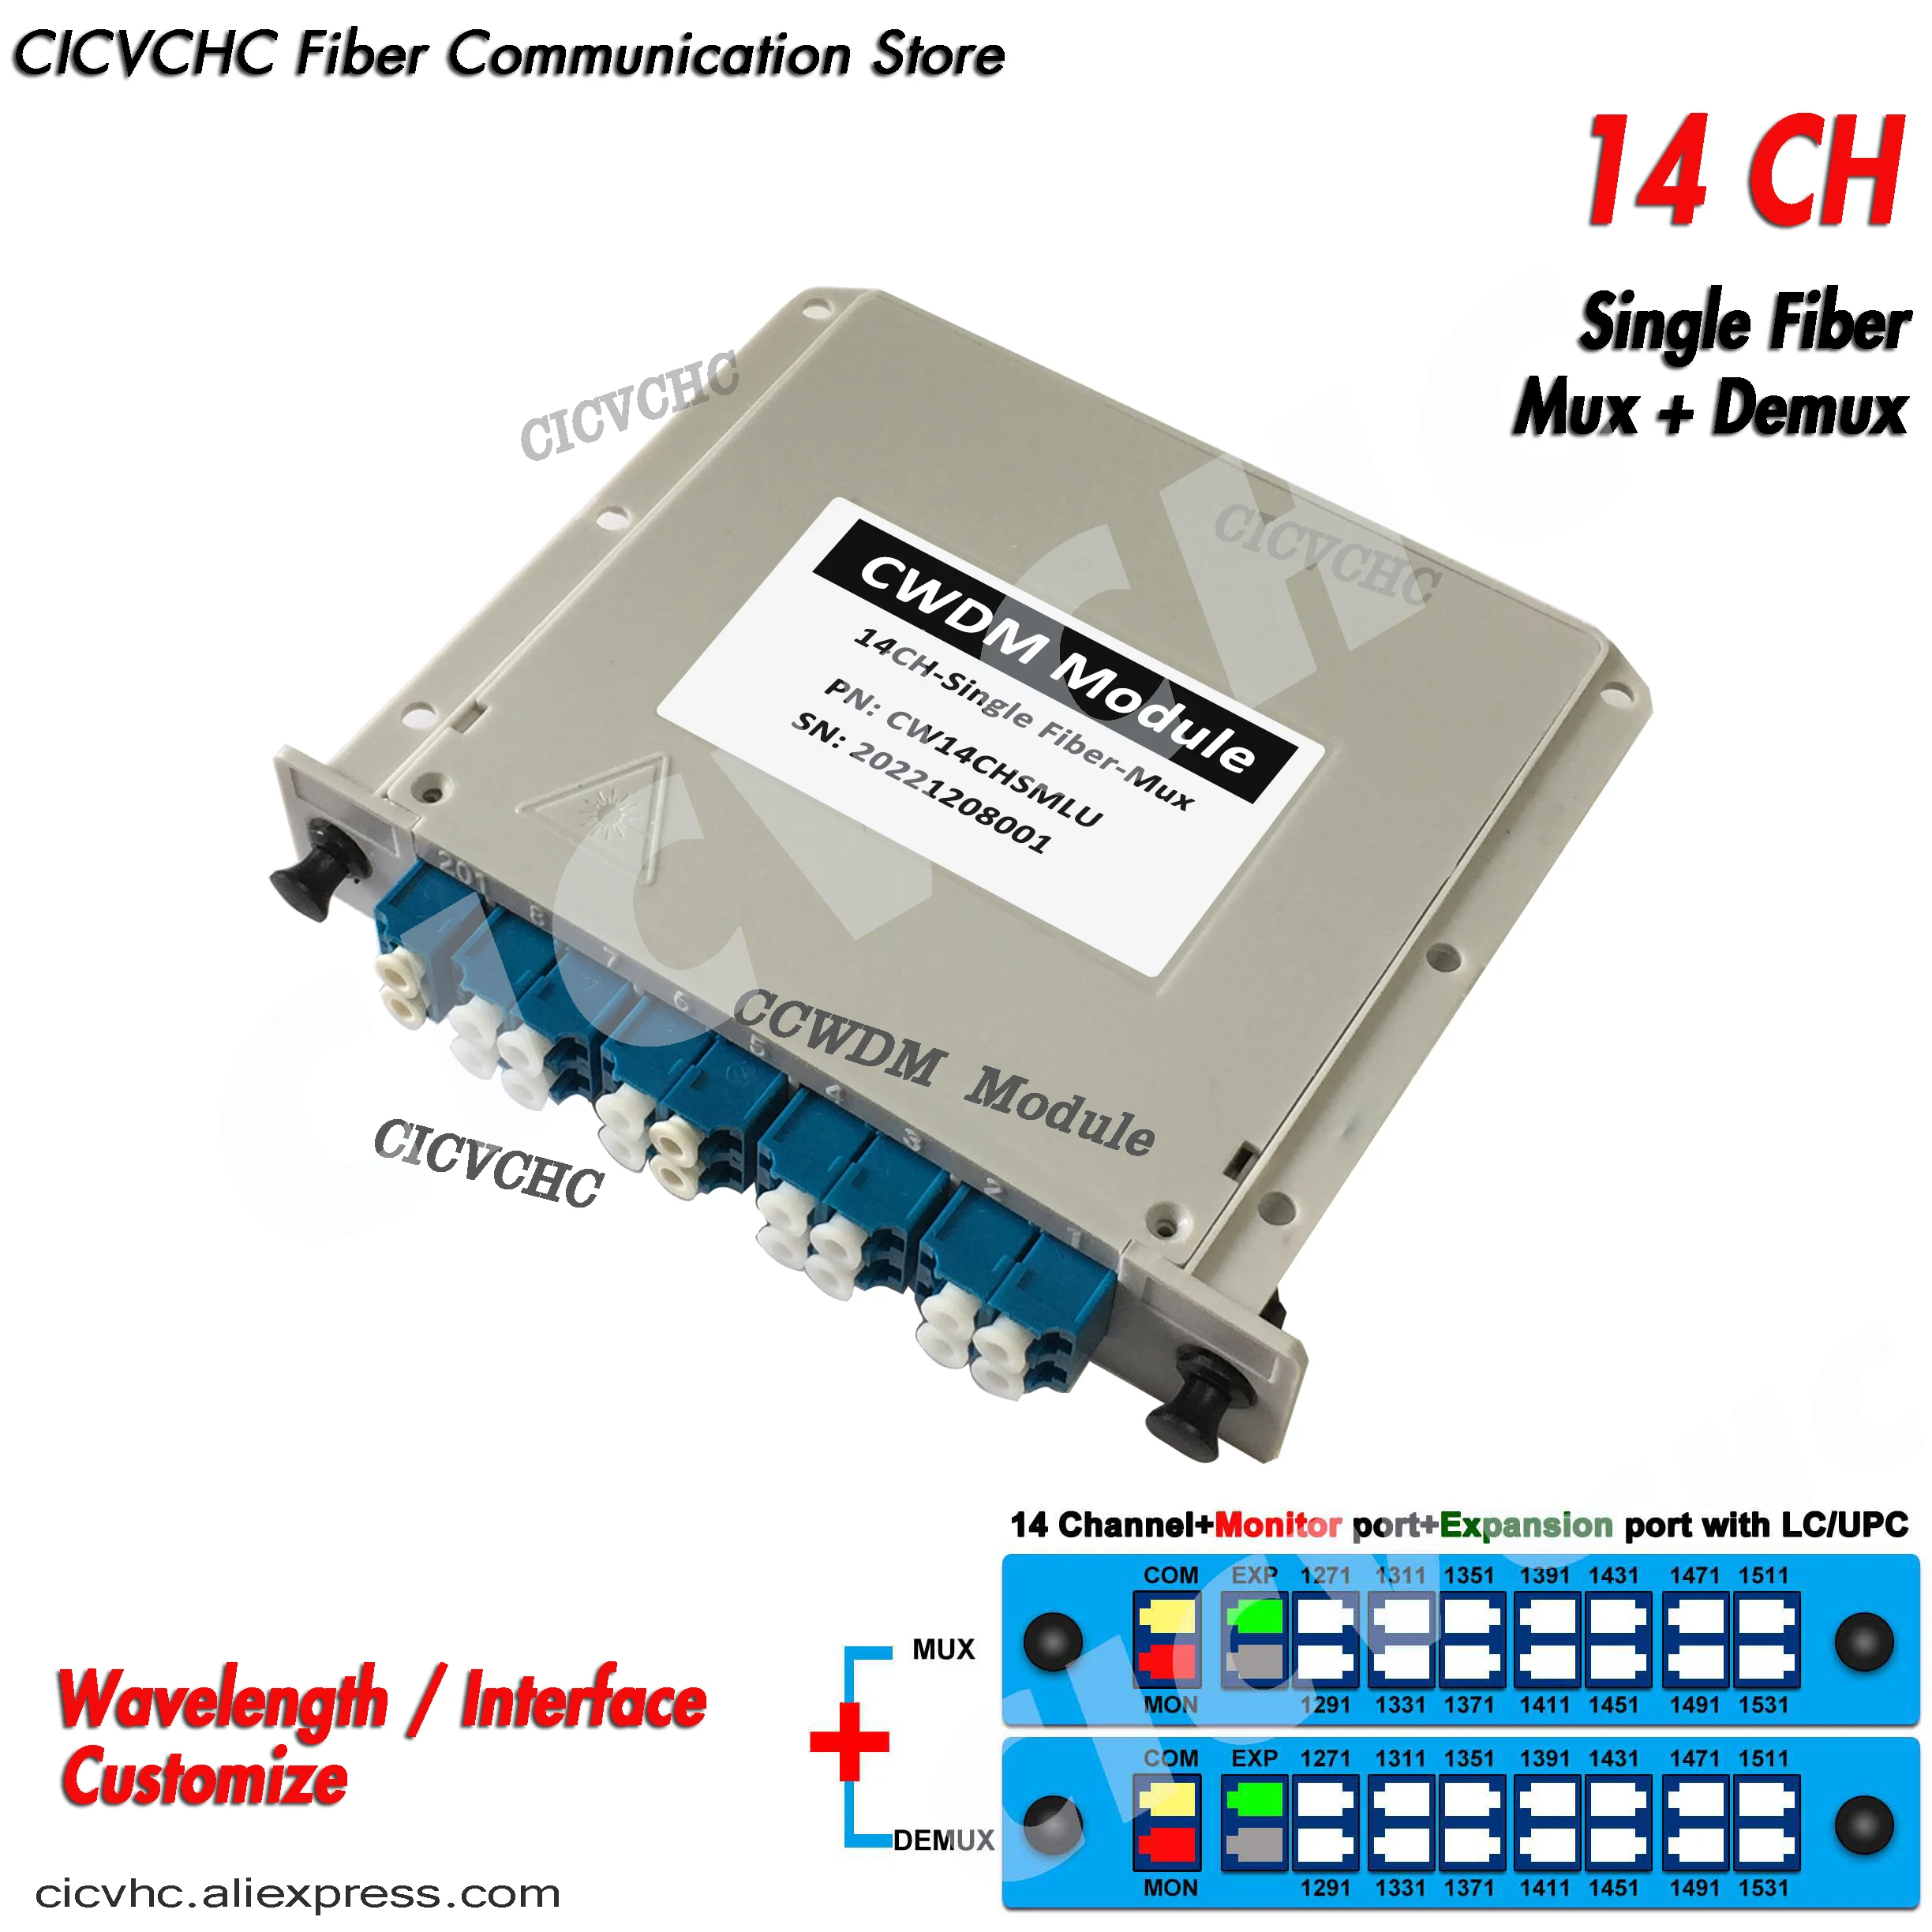 14CH CWDM Plug-in Module with Monitor and Expansion port with LC/UPC for Single Fiber